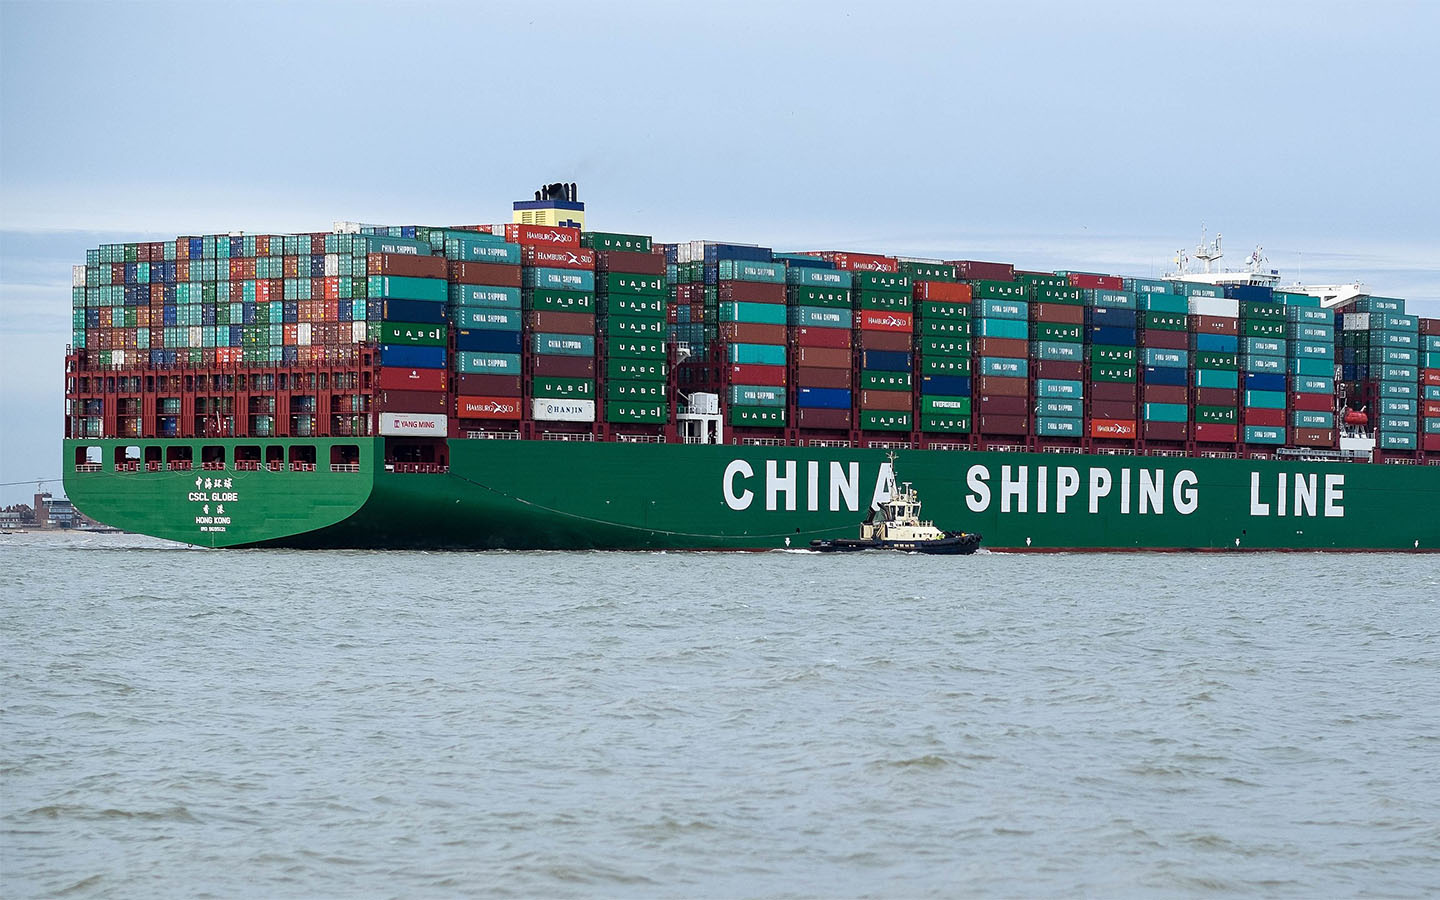 China’s trade deficit with Portuguese-speaking countries swells to US$74 billion